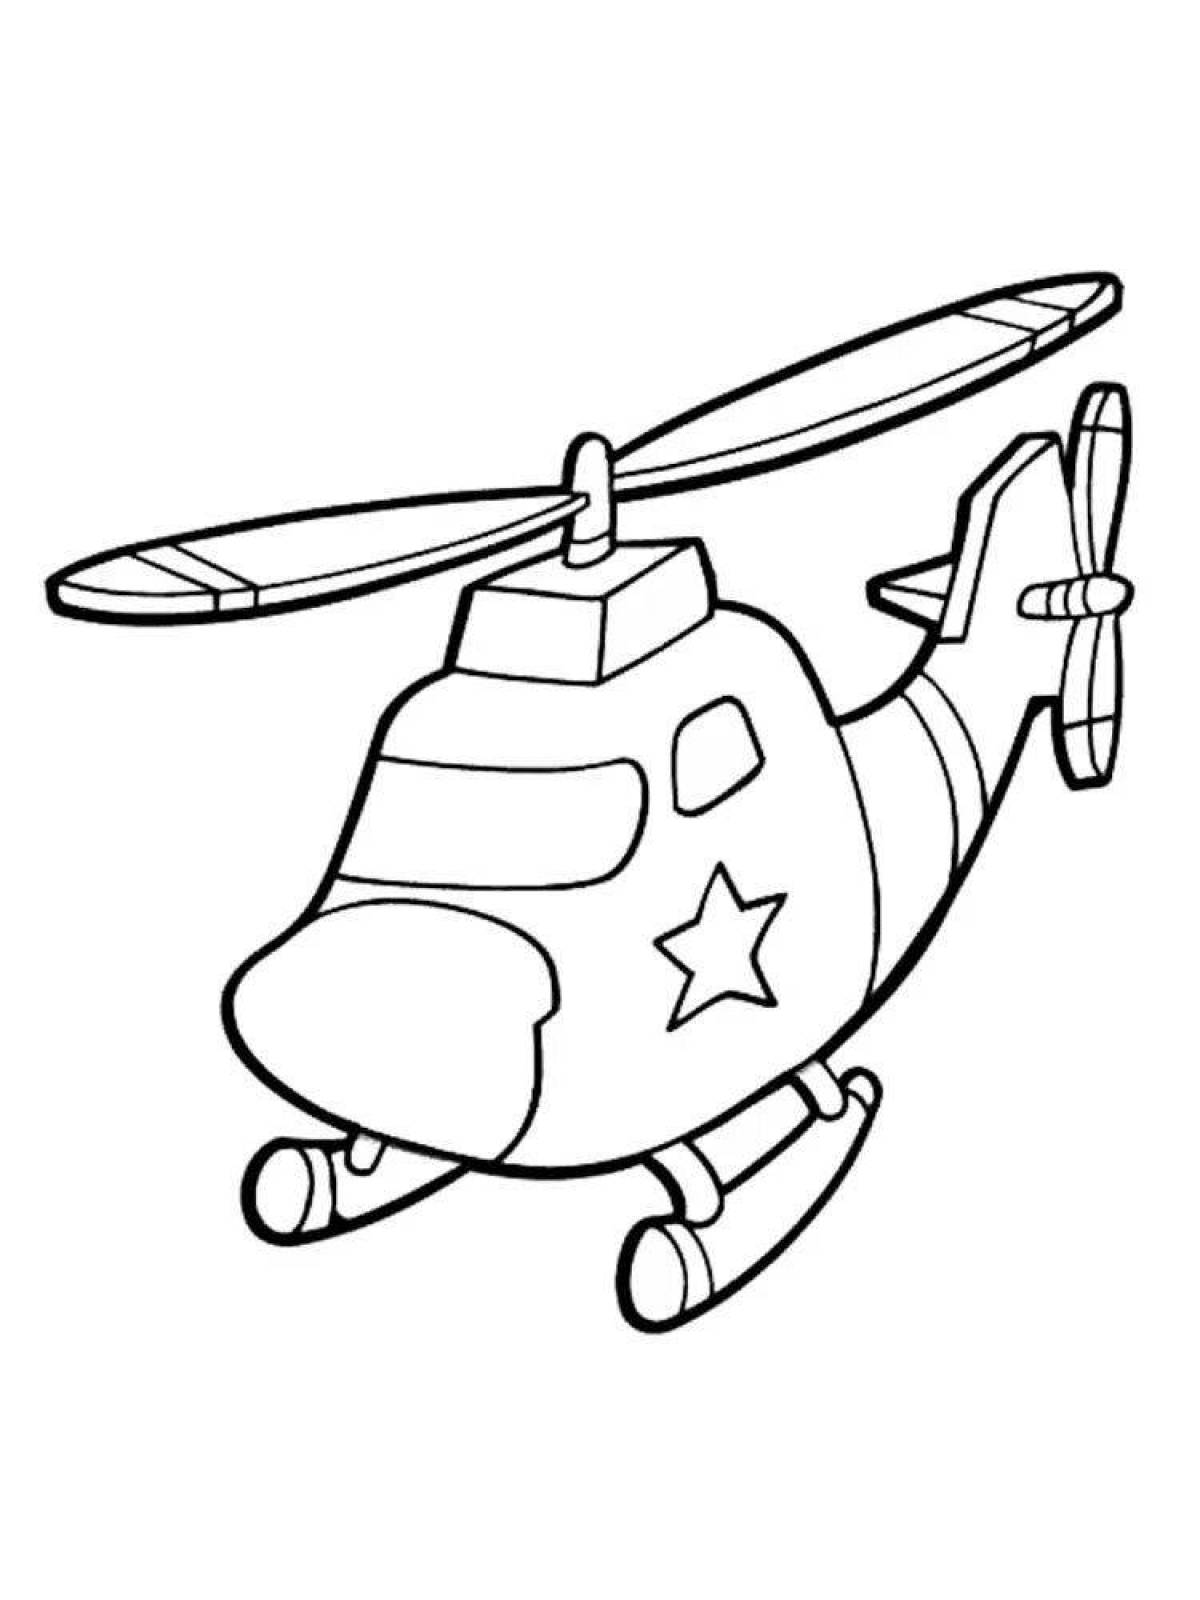 Fantastic helicopter coloring book for kids